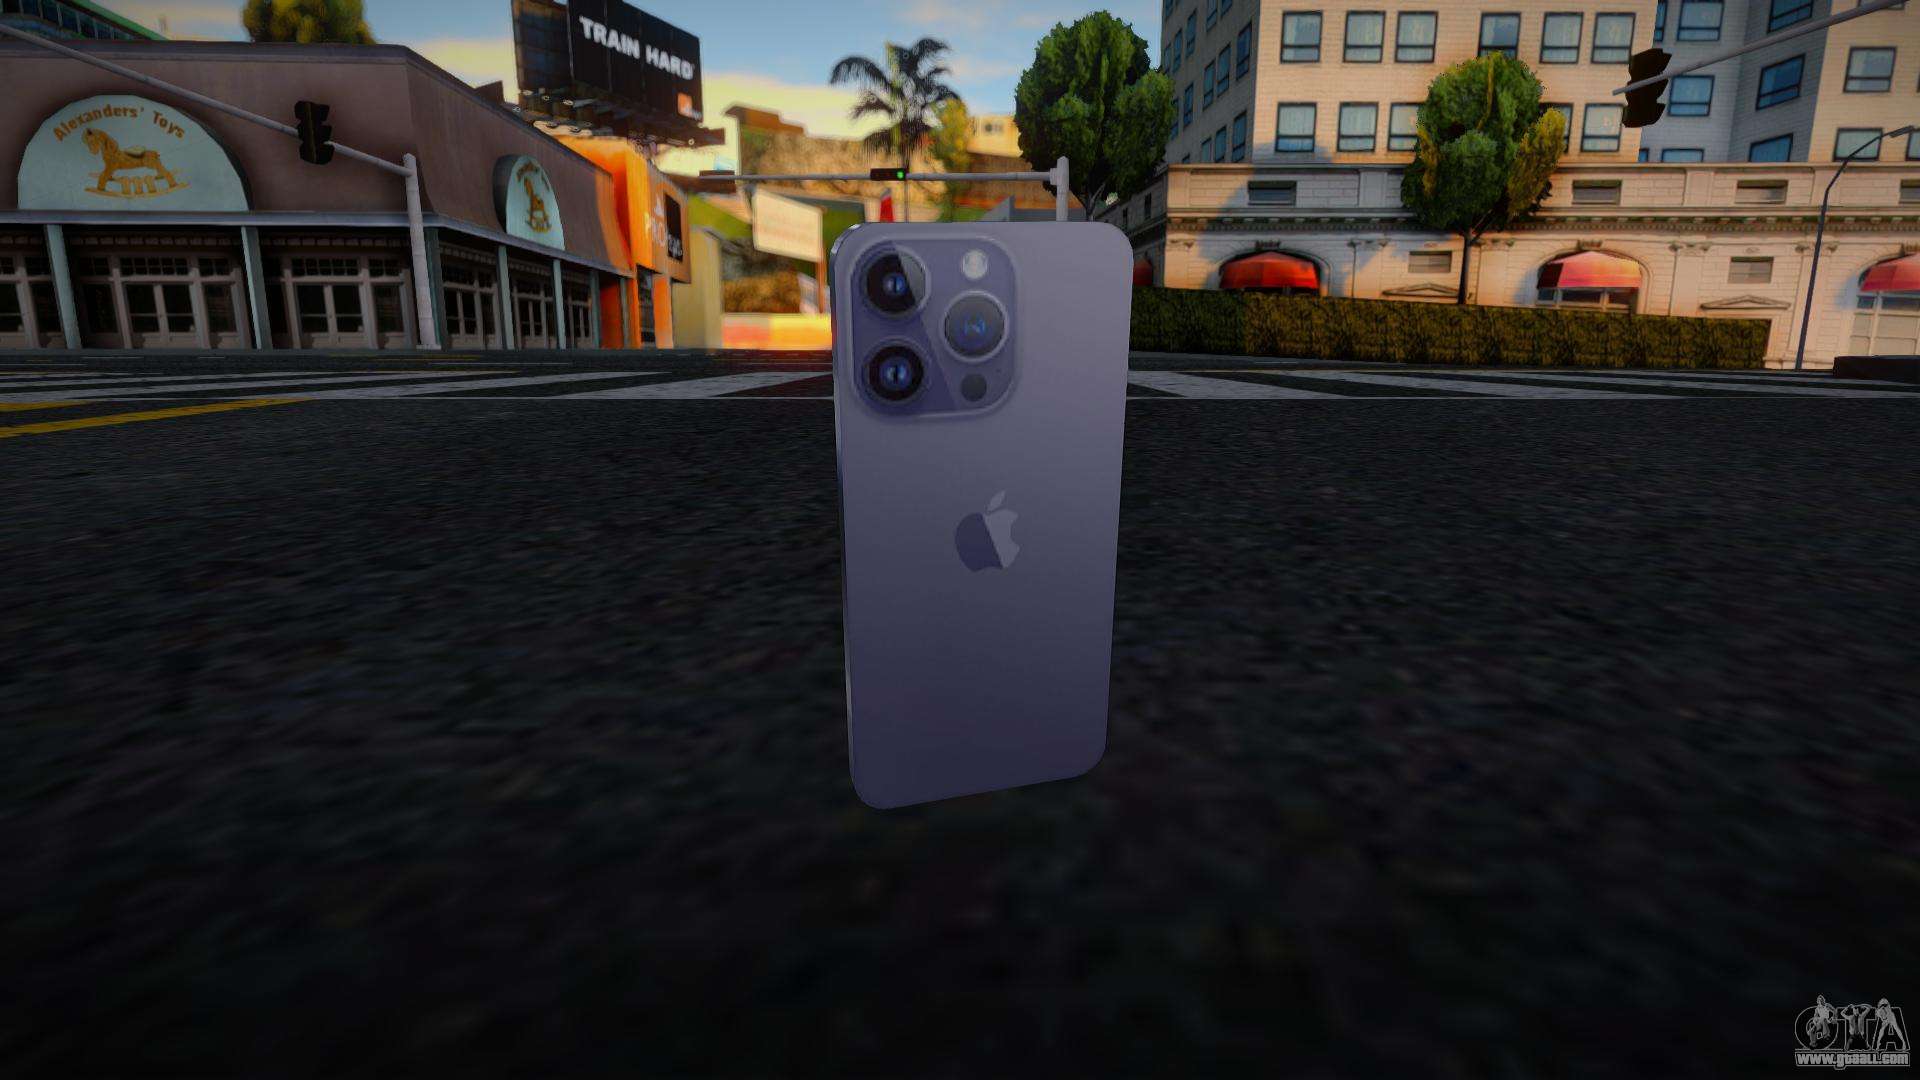 Top 5 GTA San Andreas mods for Android and iOS